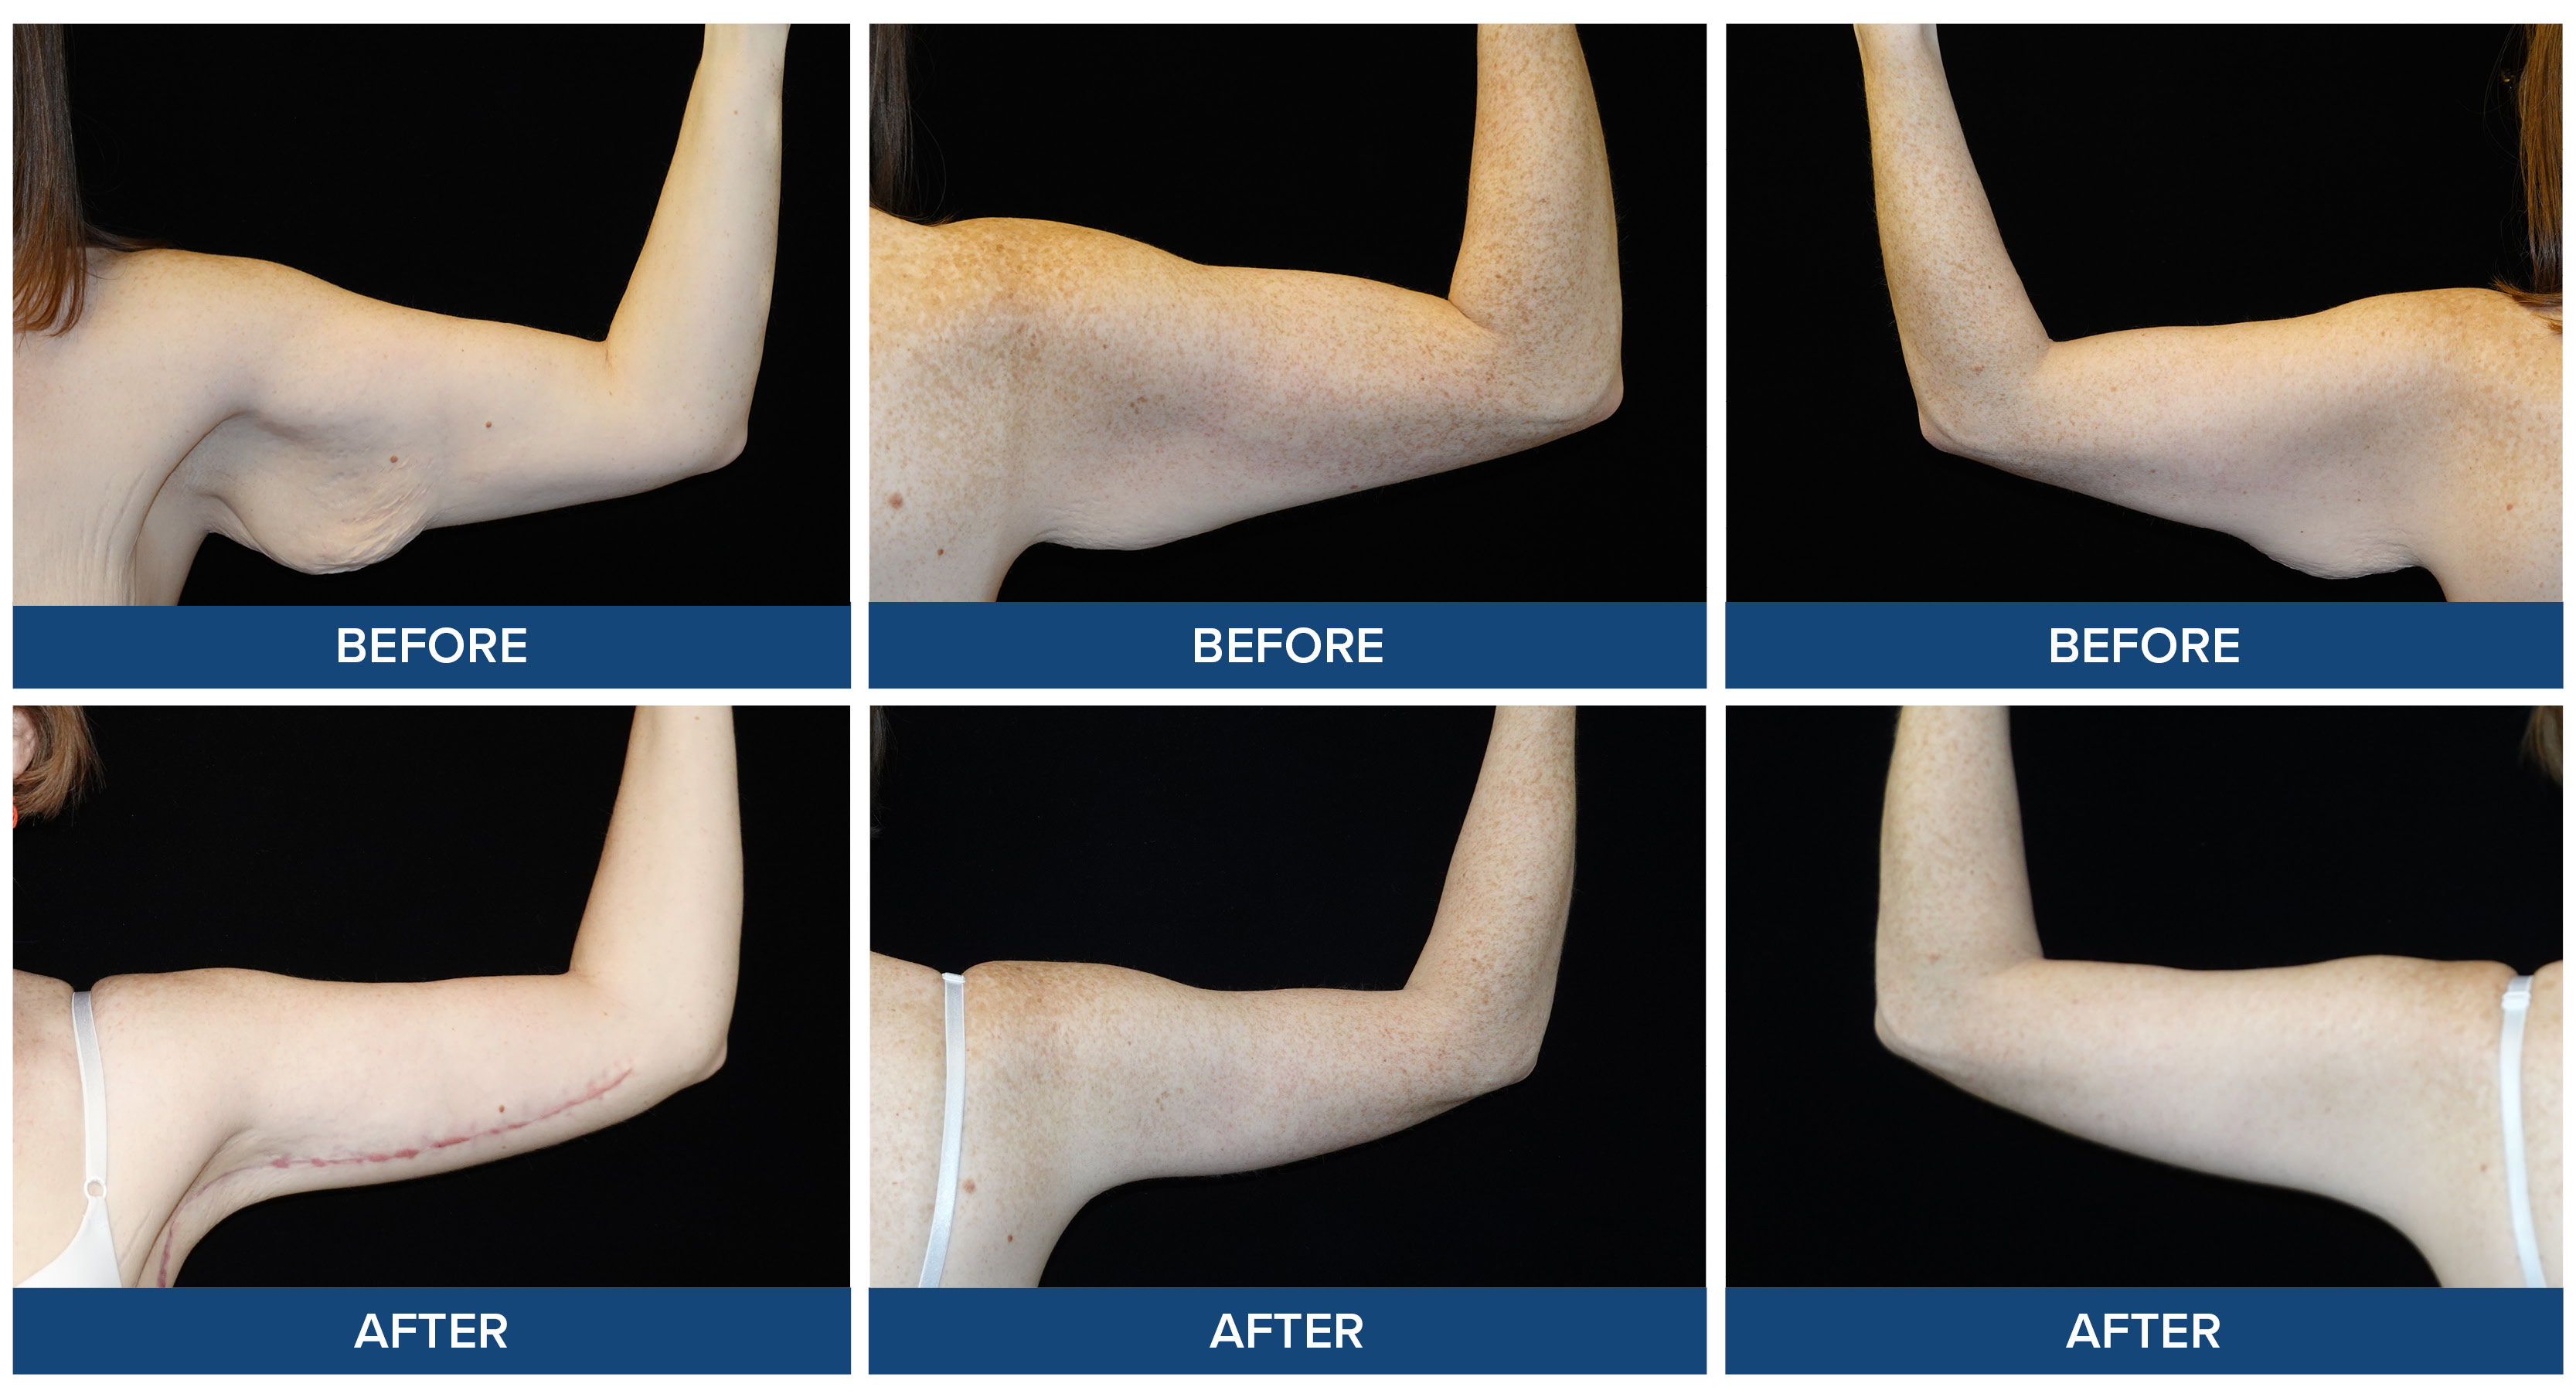 Before and after photos of brachioplasty procedure.